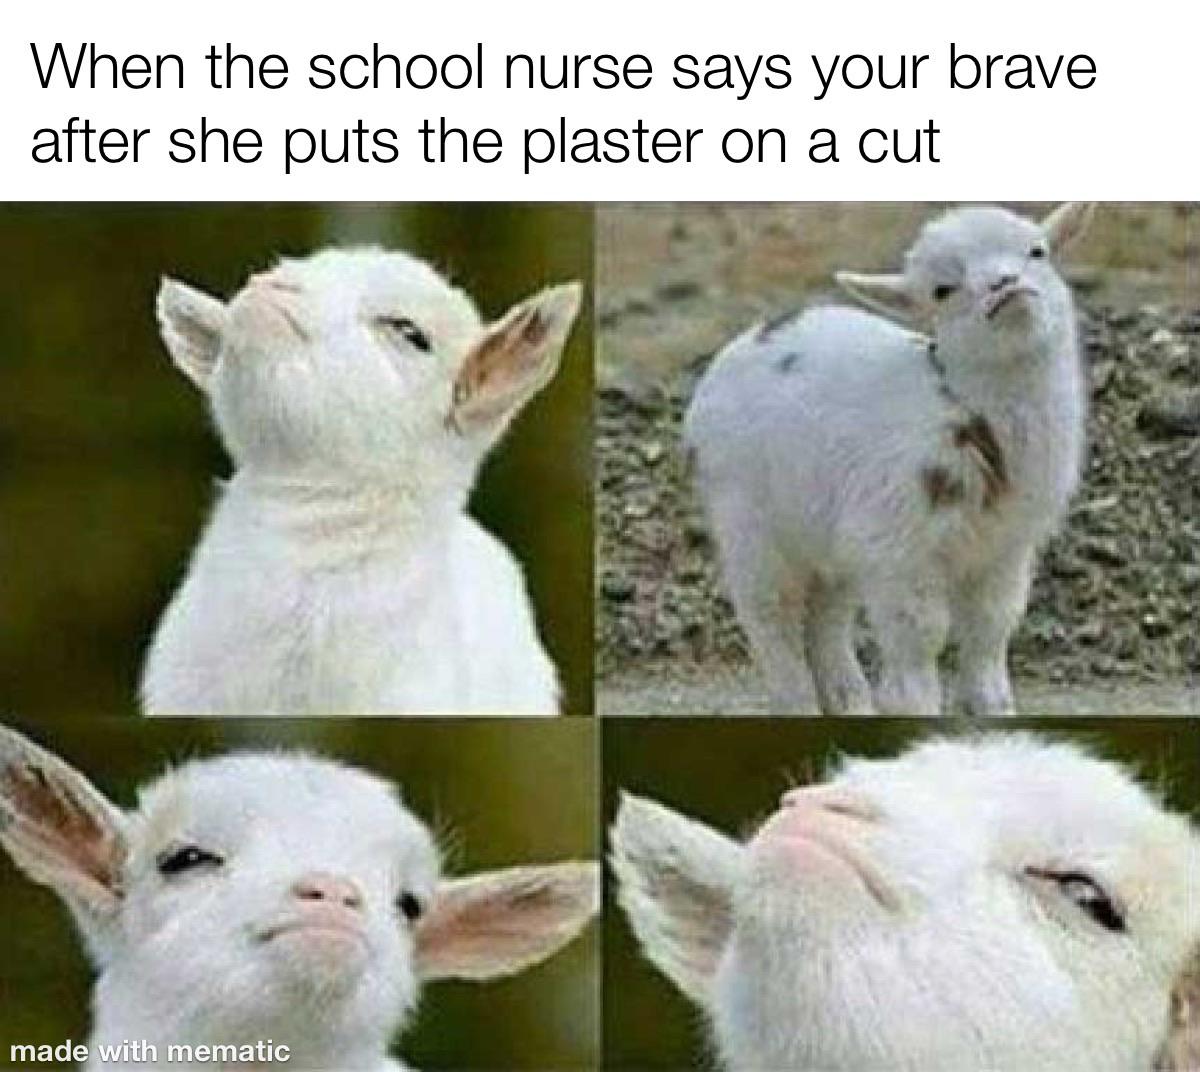 Wholesome memes, European Wholesome Memes Wholesome memes, European text: When the school nurse says your brave after she puts the plaster on a cut made ith mematic 